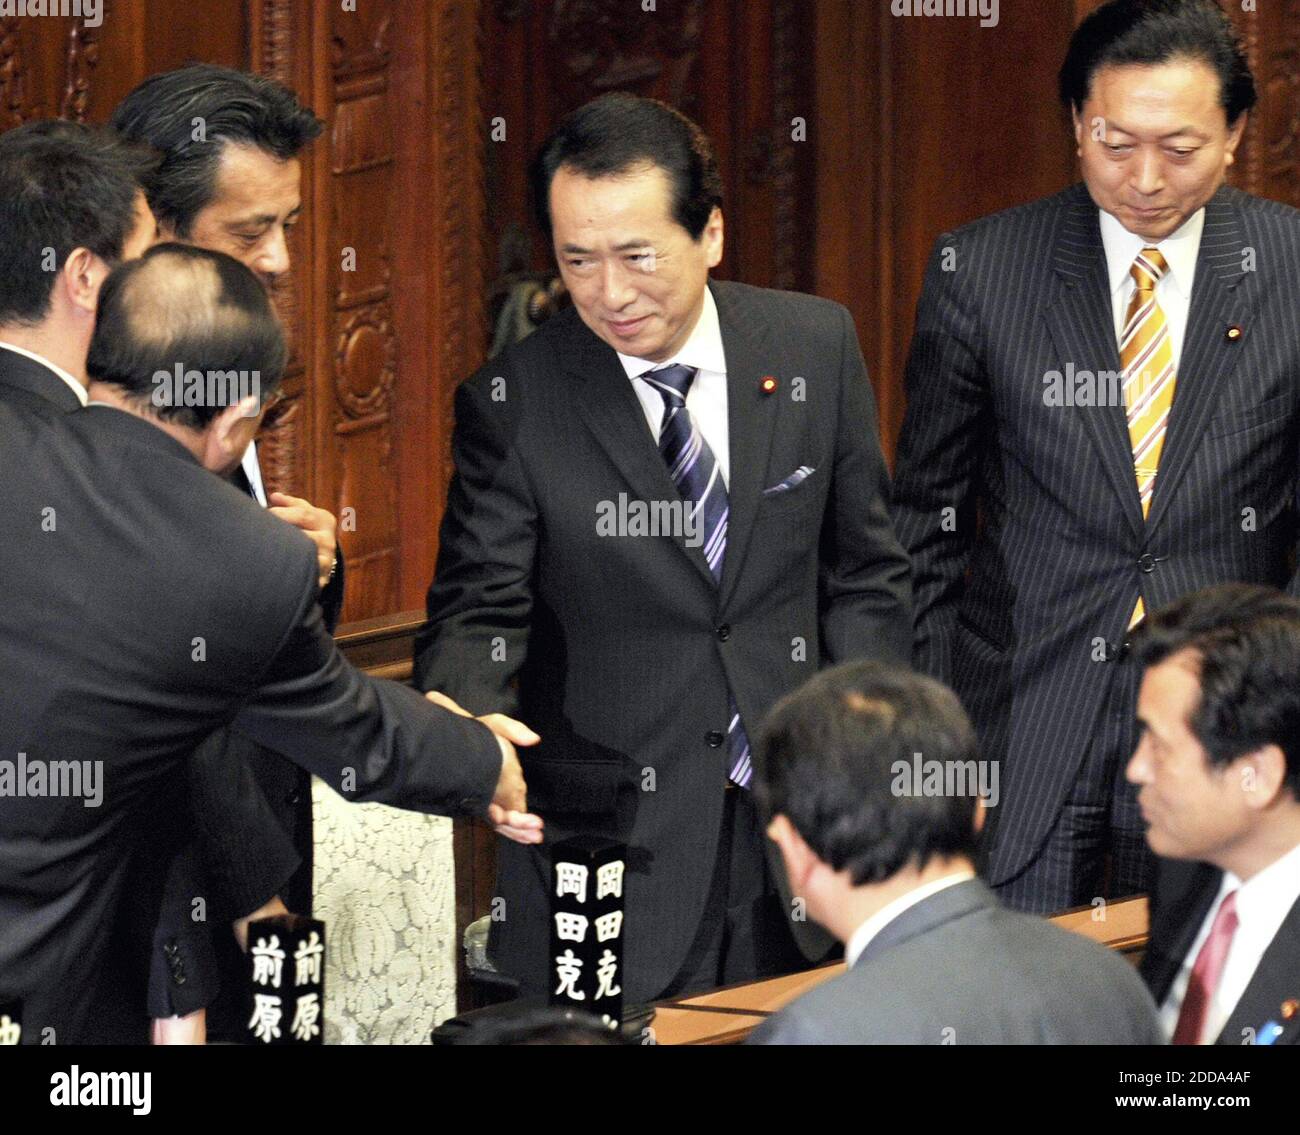 NO FILM, NO VIDEO, NO TV, NO DOCUMENTARY - Naoto Kan shakes hands with another party member after being elected prime minister at a plenary session of the House of Representatives on Friday afternoon, June 4, 2010. On Kan's right is outgoing Prime Minister Yukio Hatoyama. Photo by Yomiuri Shimbun/MCT/ABACAPRESS.COM Stock Photo